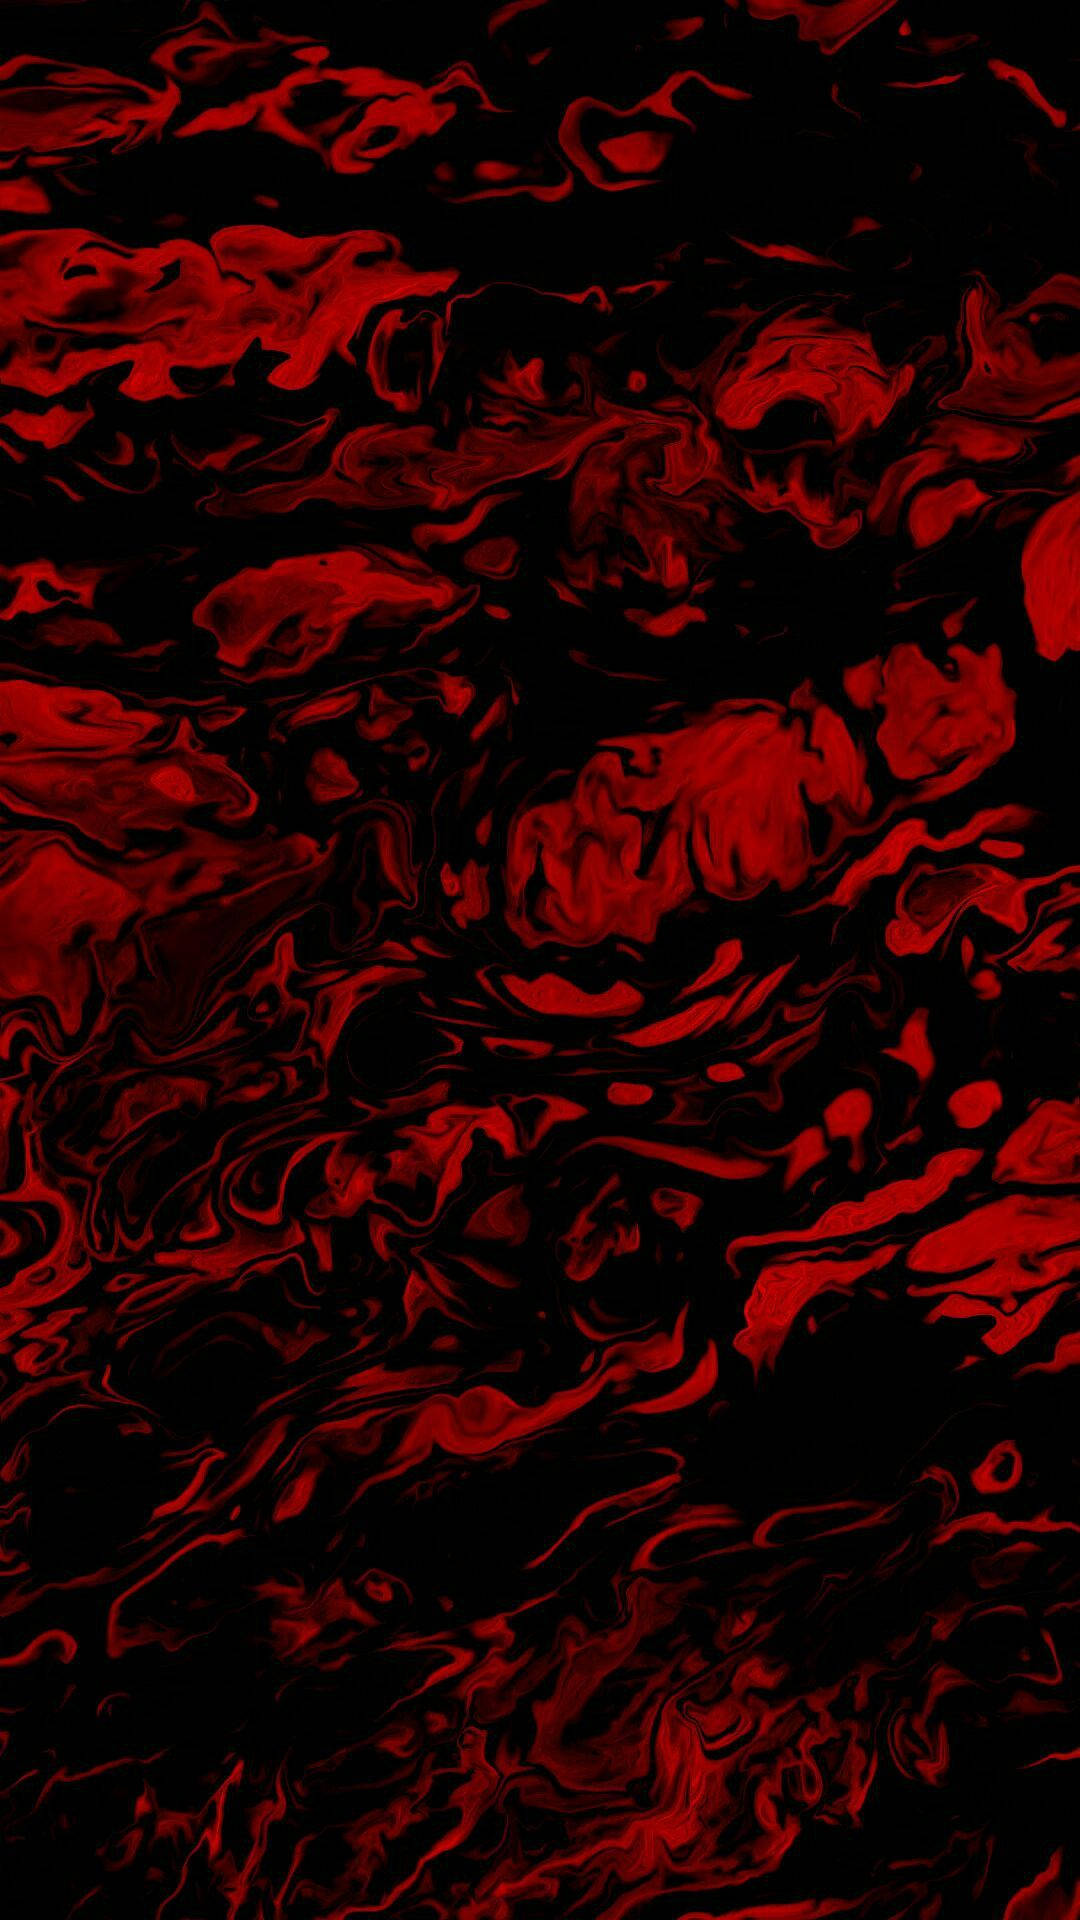 Get acquainted with Red Dope and explore its psychedelic landscape Wallpaper